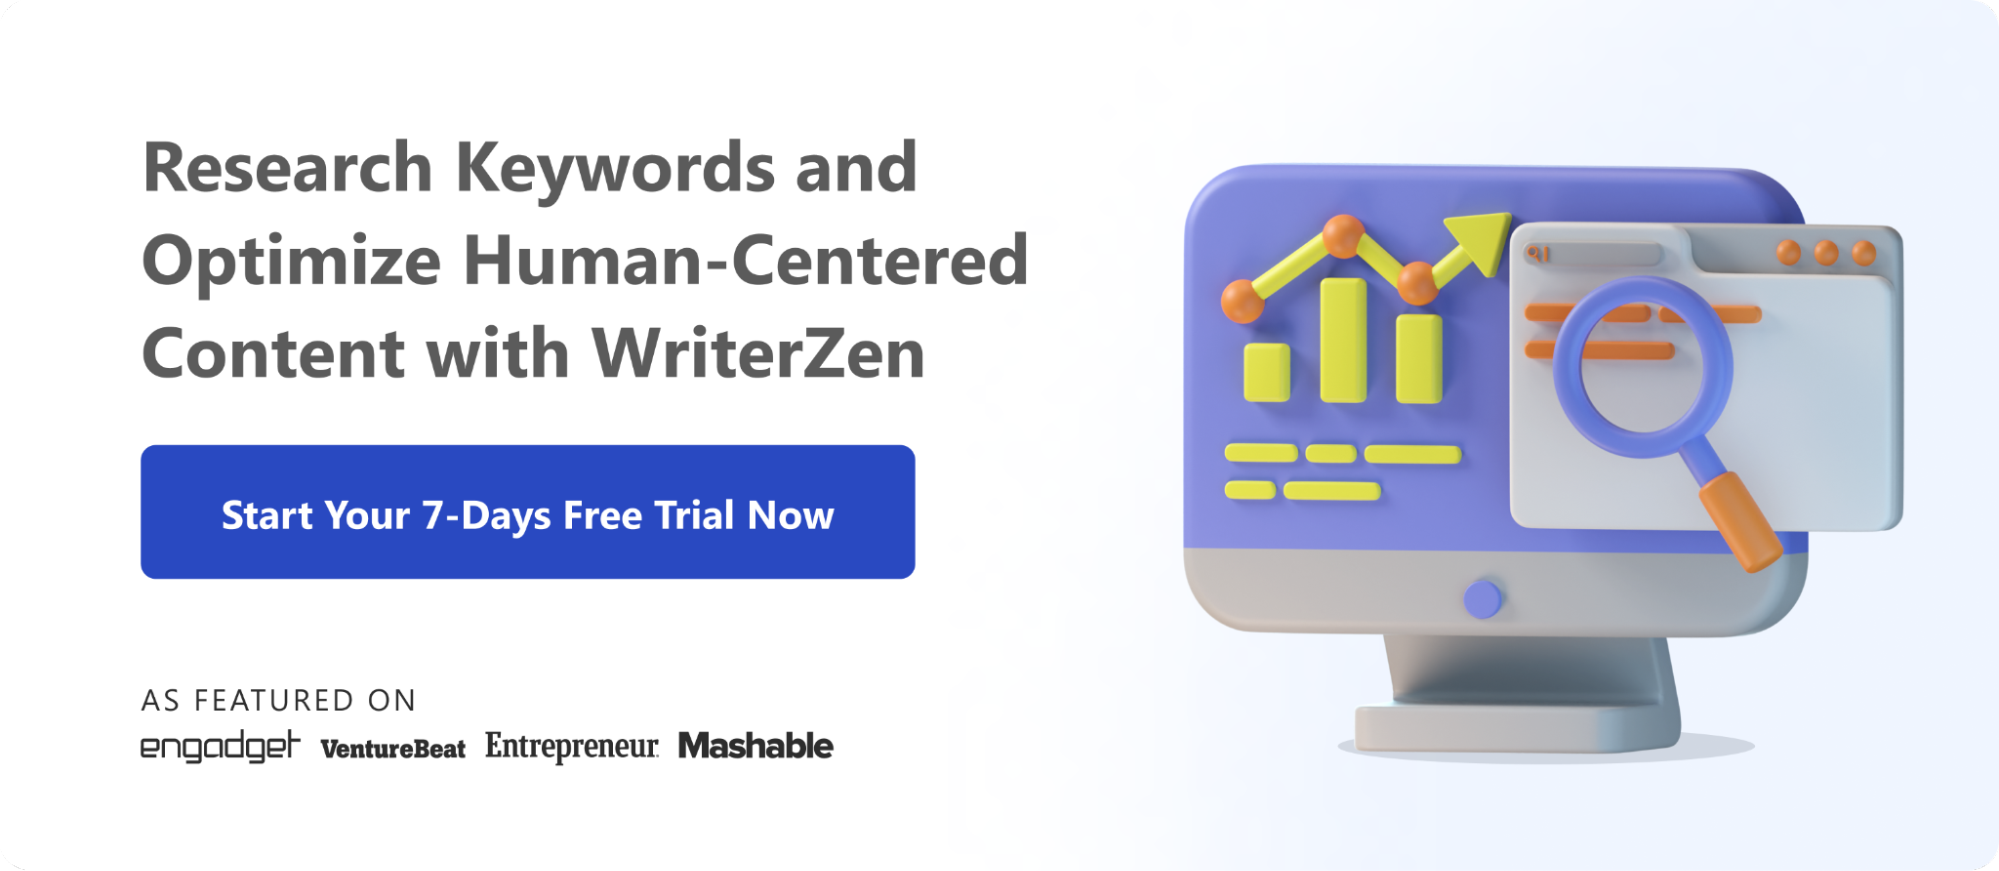 Research Keywords and Optimize Human-Centered Content with WriterZen